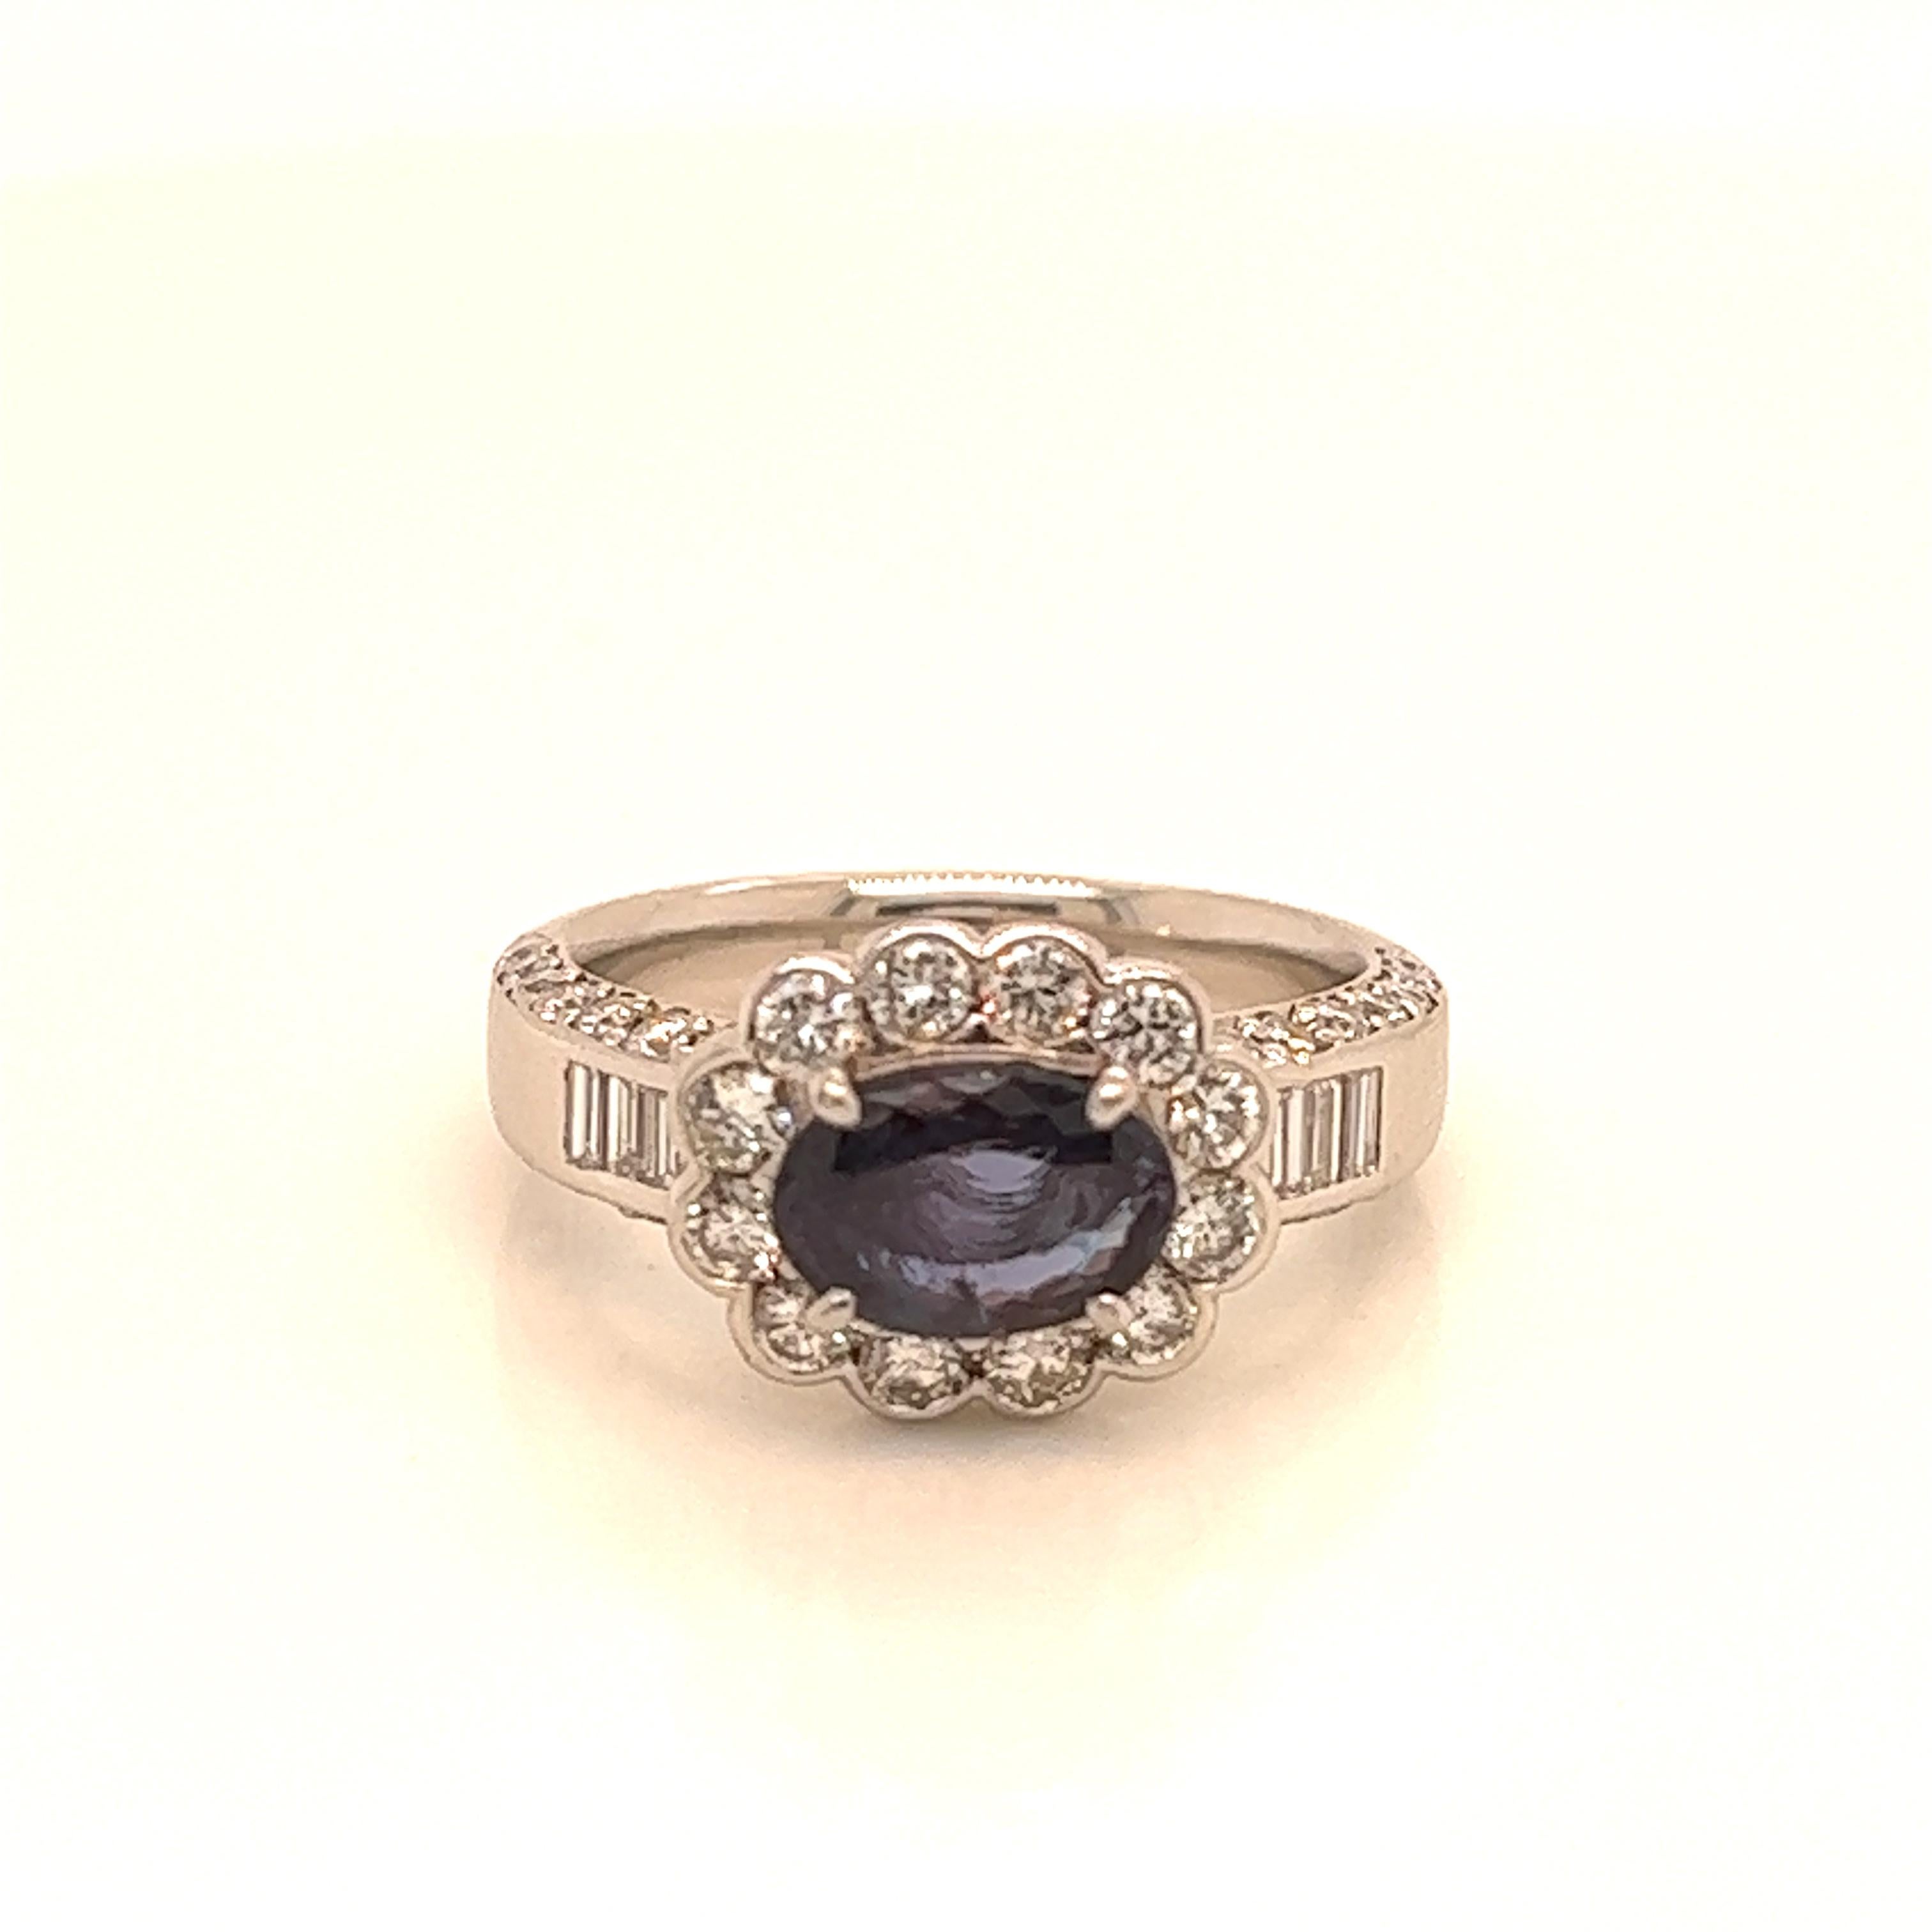 This is a gorgeous natural AAA quality oval Alexandrite surrounded by dainty diamonds that is set in a vintage platinum setting. This ring features a natural 1.19 carat oval alexandrite that is certified by the Gemological Institute of America (GIA)